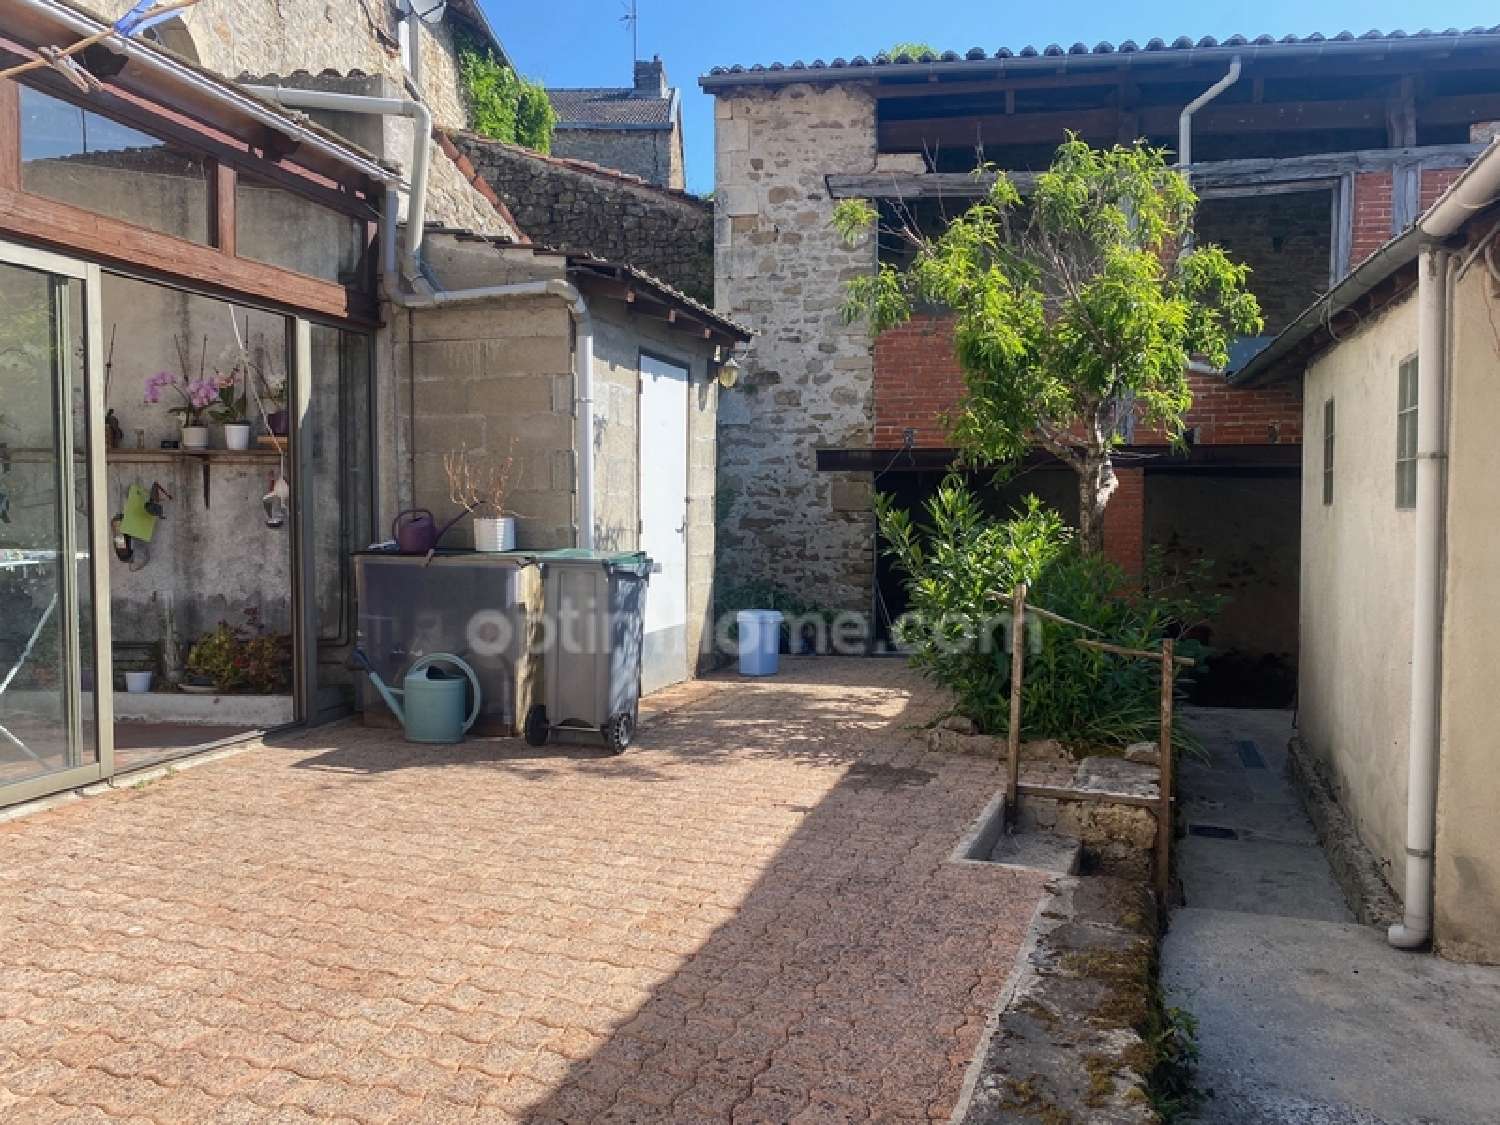  for sale house Châteauponsac Haute-Vienne 6